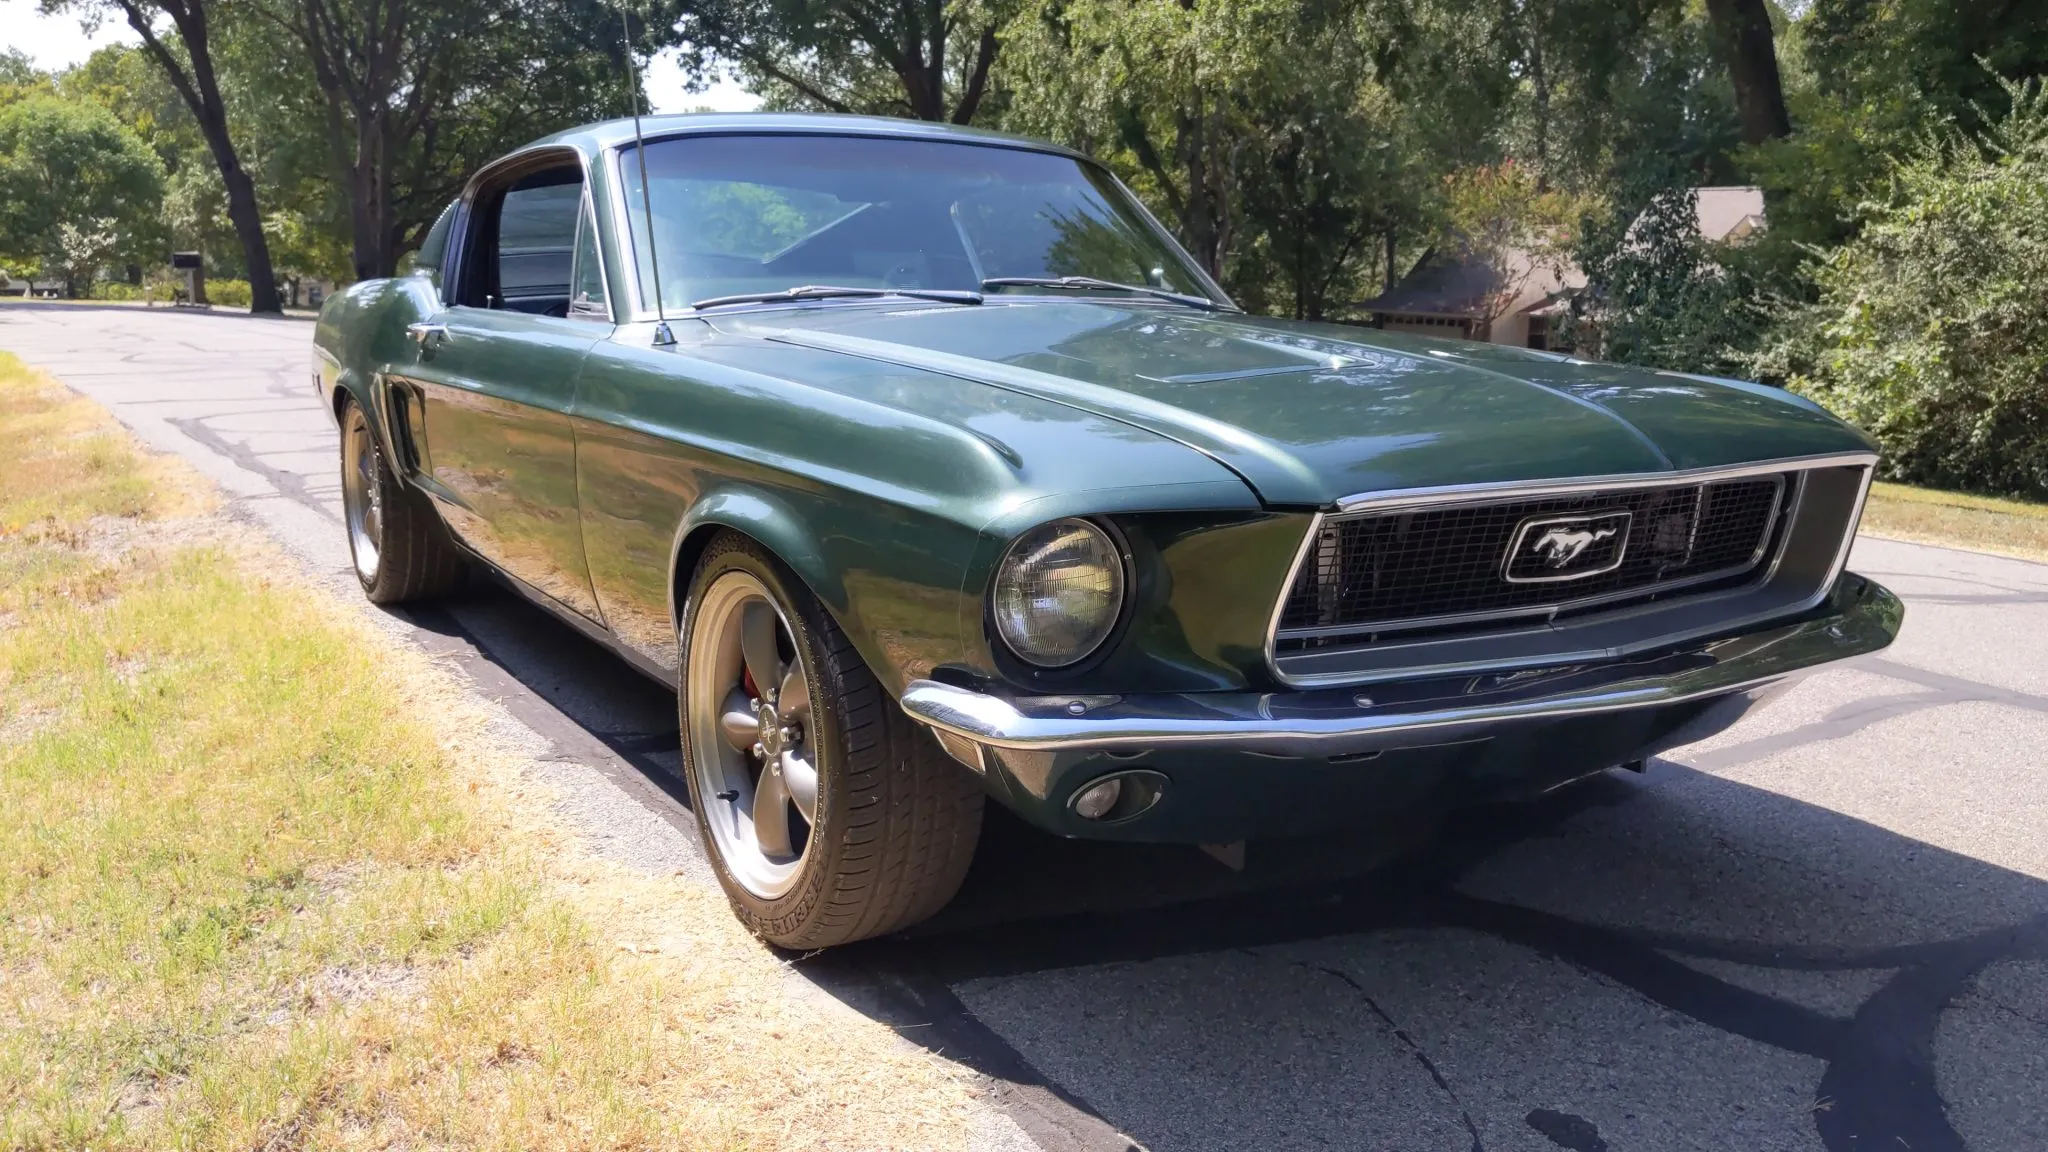 Sculpted Speed: The Iconic Design and Performance of the 1968 Mustang Fastback with a 351 Engine